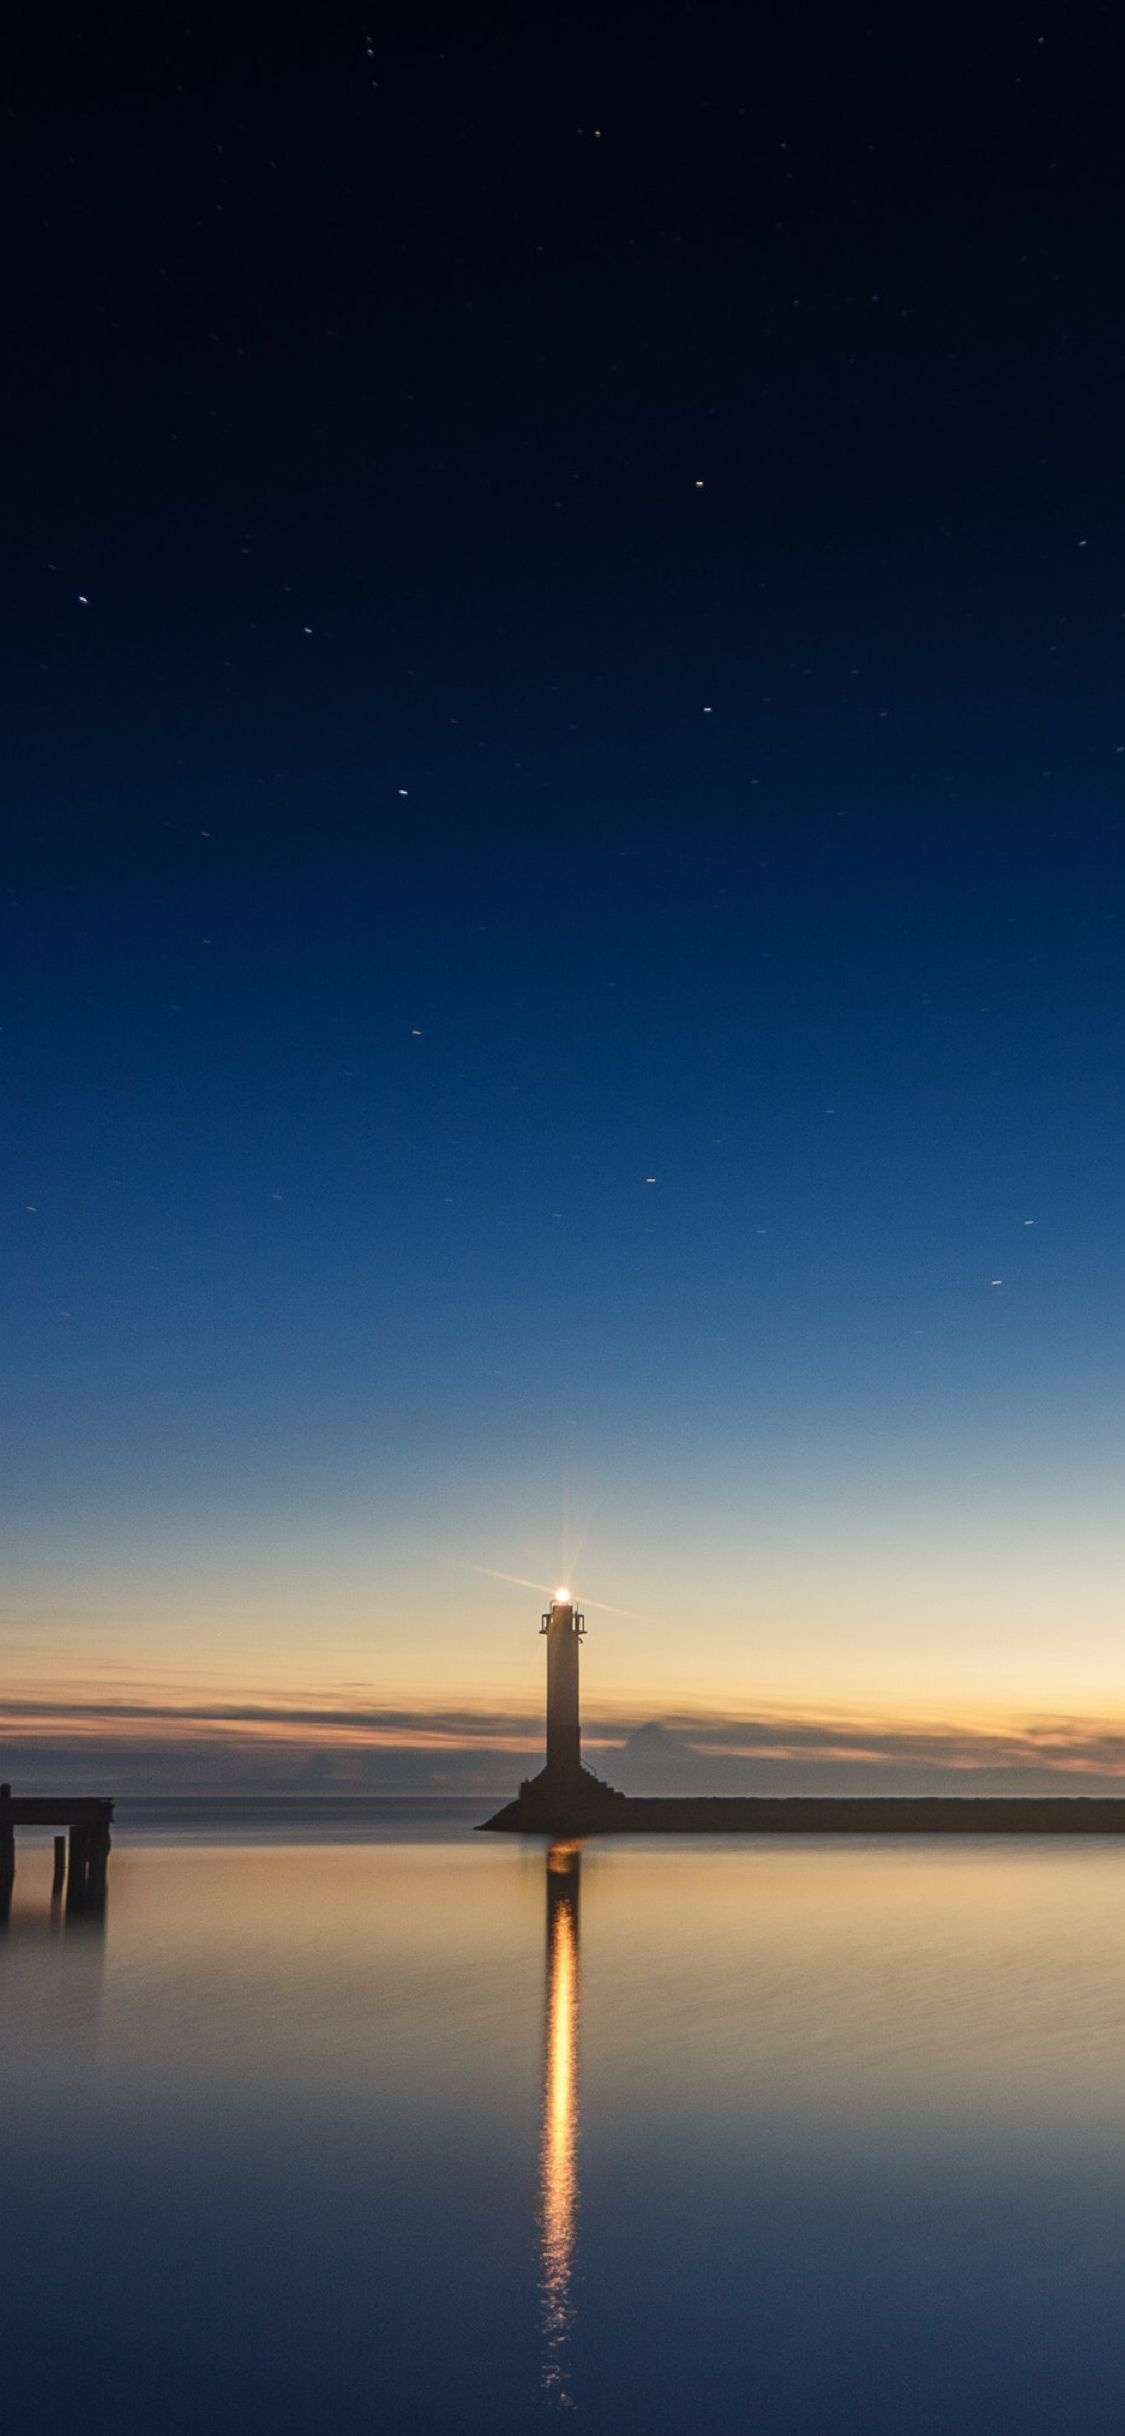 Clear night, Scenic beauty, Lighthouse silhouette, iPhone wallpaper, 1130x2440 HD Phone